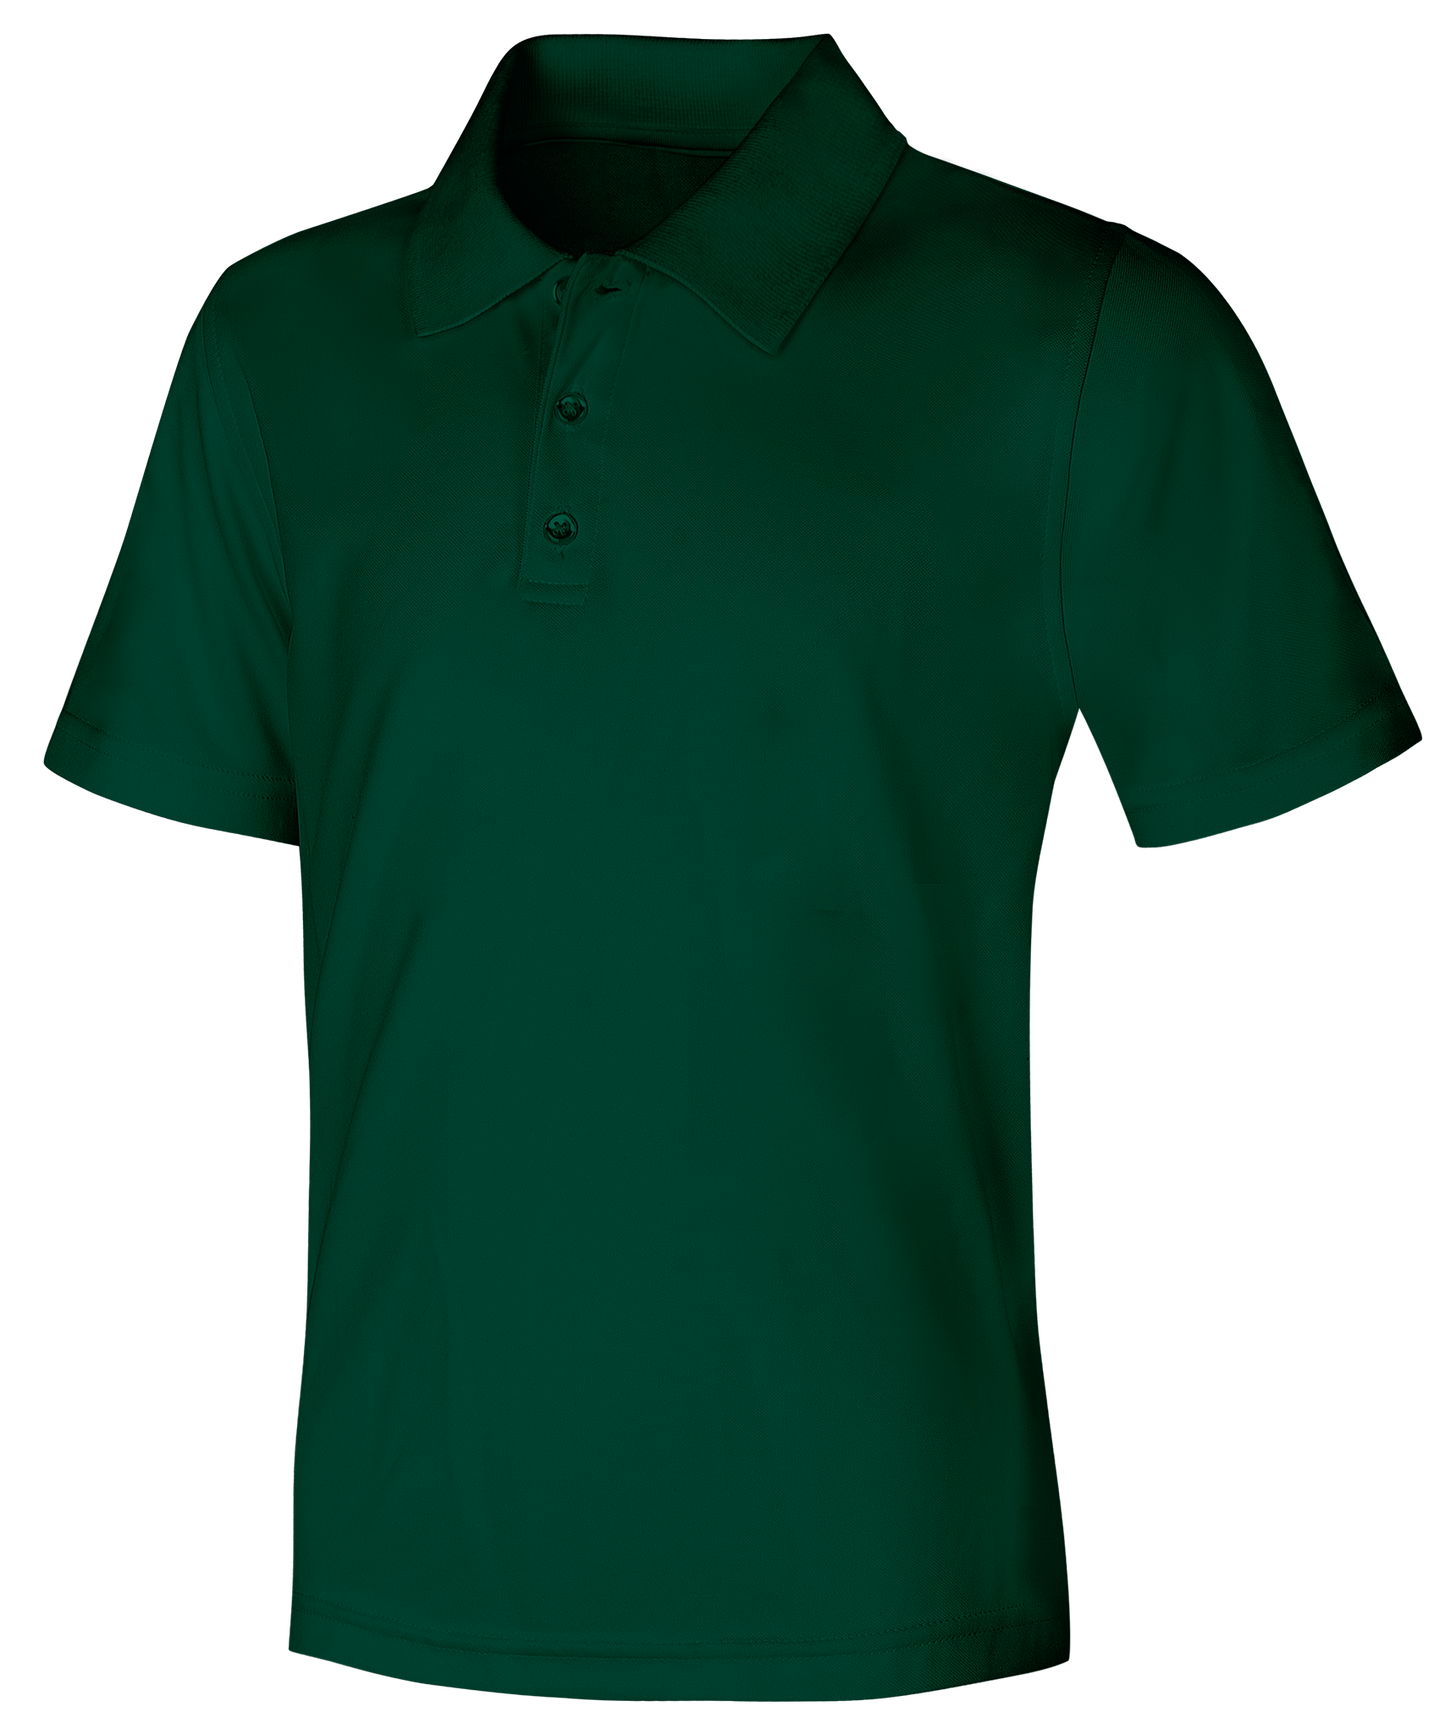 Youth Unisex Moisture Wicking Polo